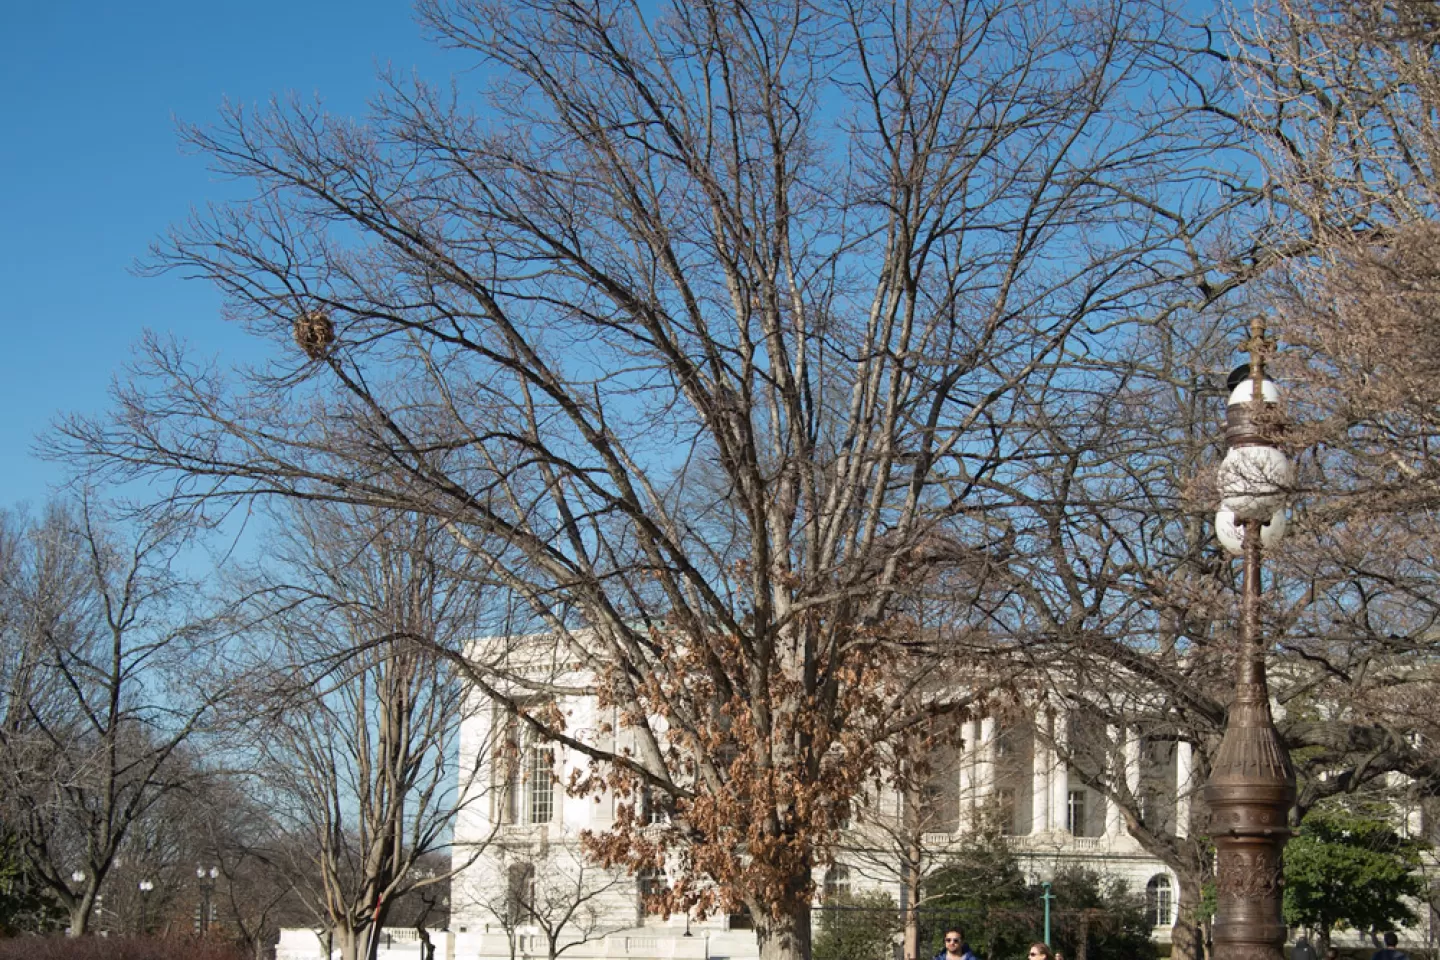 Tree for the state of Maryland on the U.S. Capitol Grounds during winter.